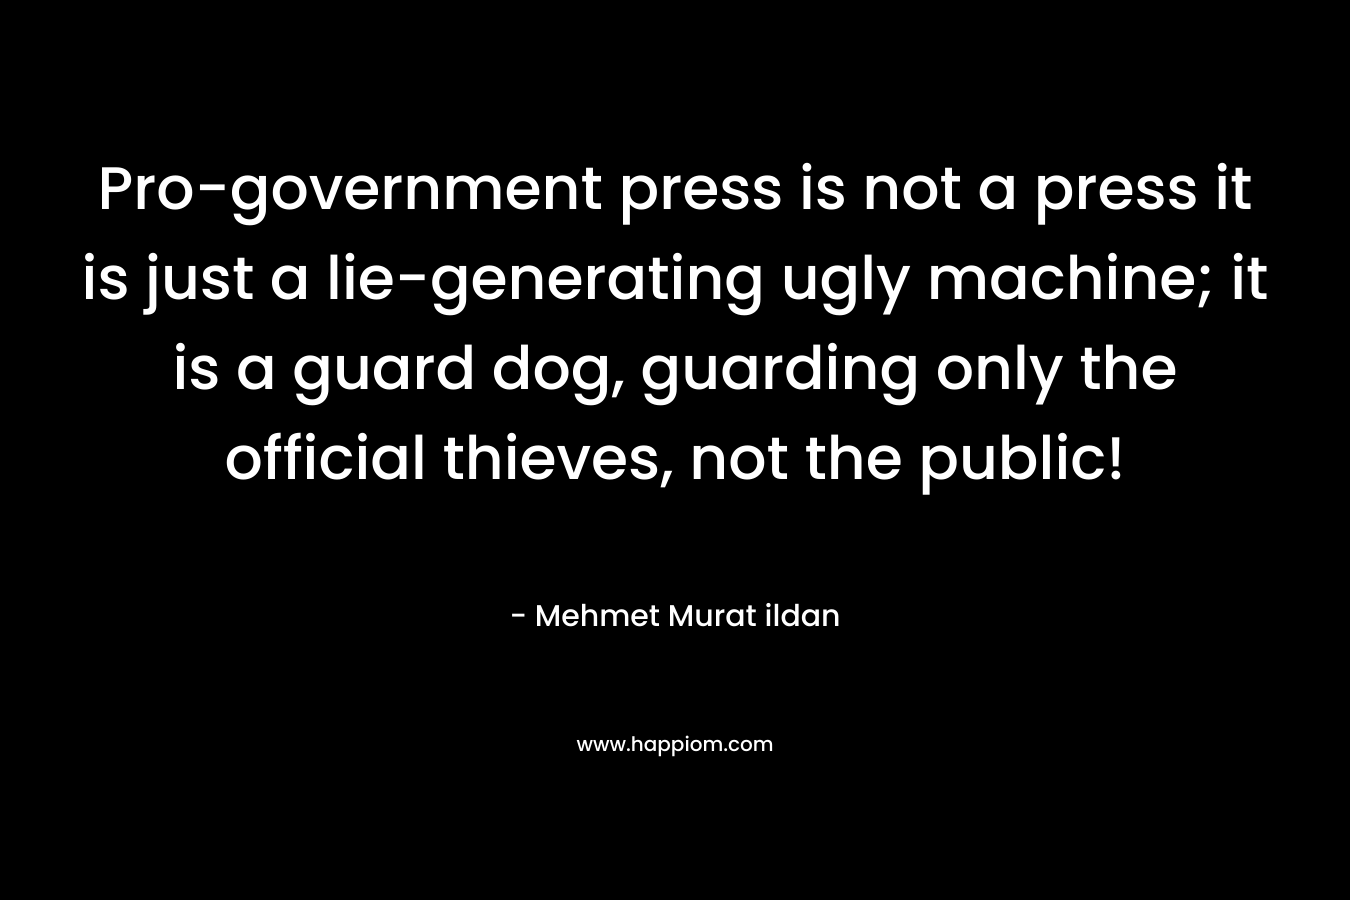 Pro-government press is not a press it is just a lie-generating ugly machine; it is a guard dog, guarding only the official thieves, not the public!